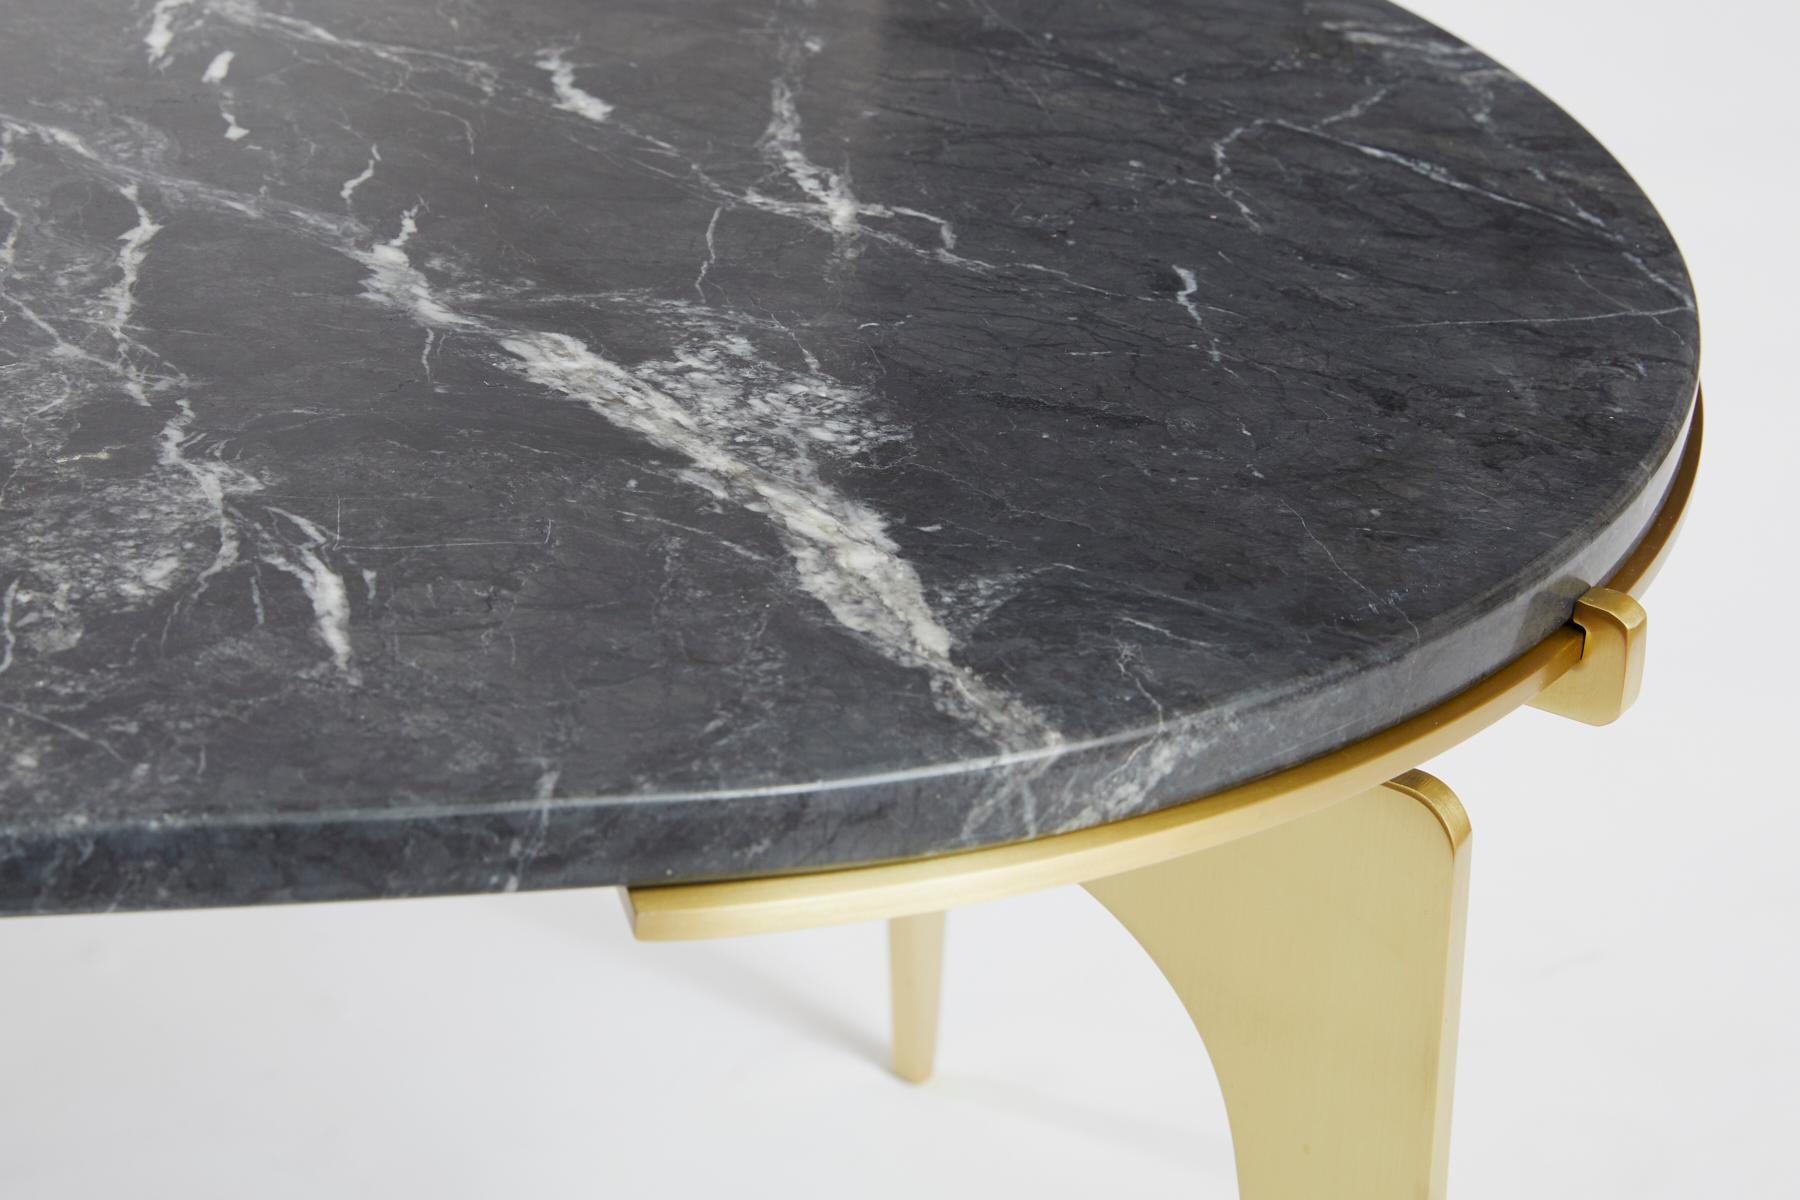 Black (Grigio Carnico - Black Stone) Prong Racetrack Coffee Table in Brass Base with Marble Top by Gabriel Scott 7